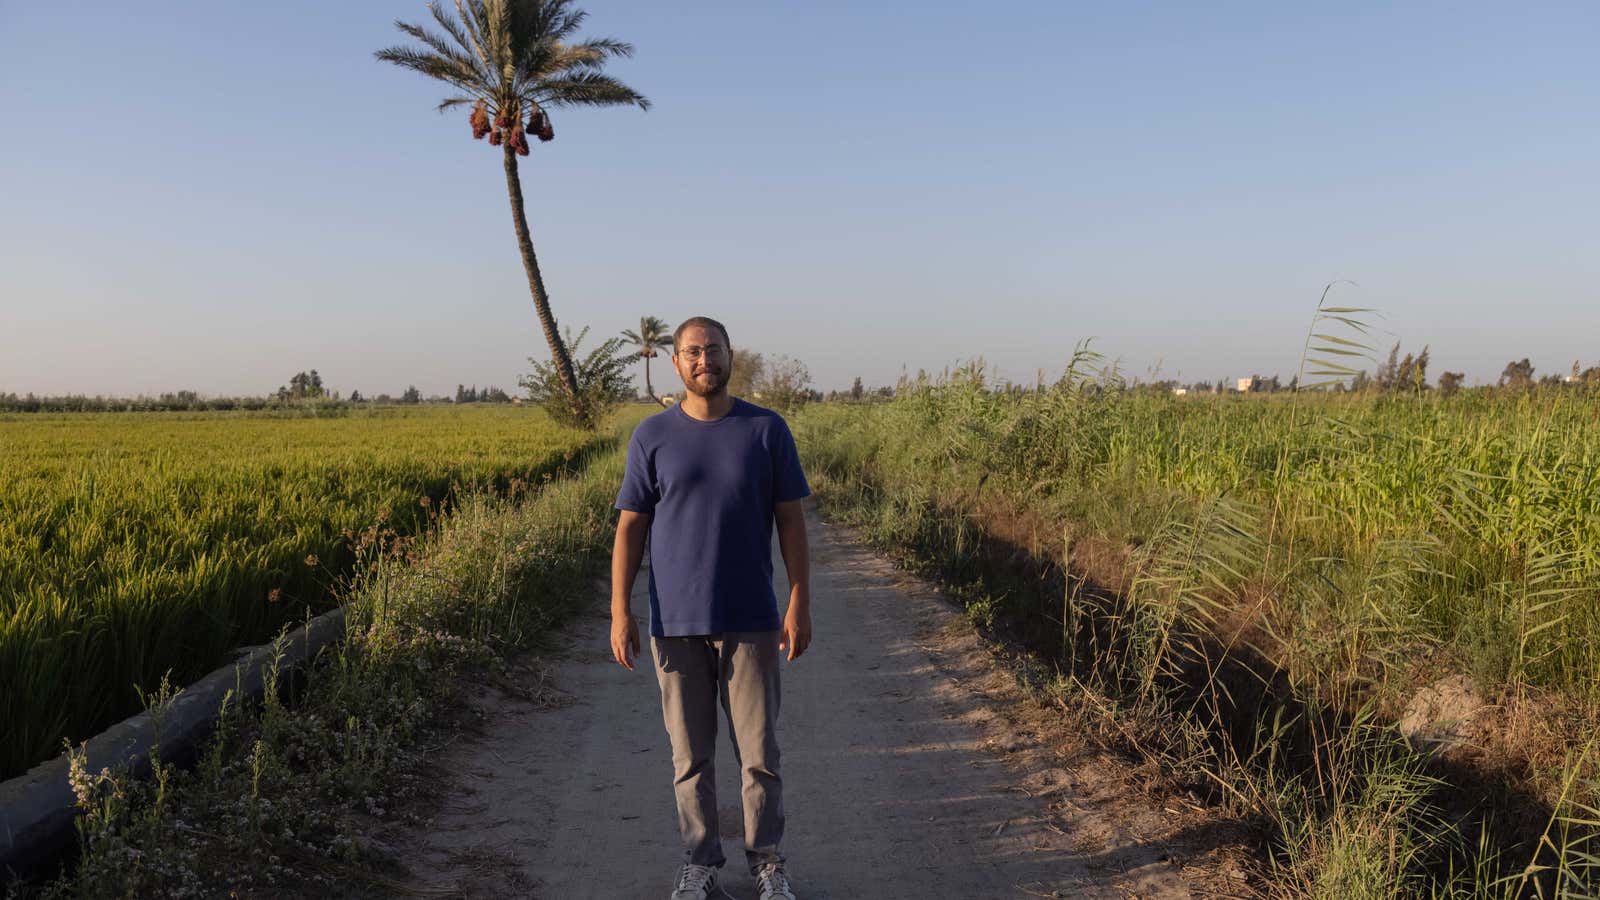 Omar Fahmy built an app to help farmers in Egypt&#39;s Nile Delta earn more money from their crops.